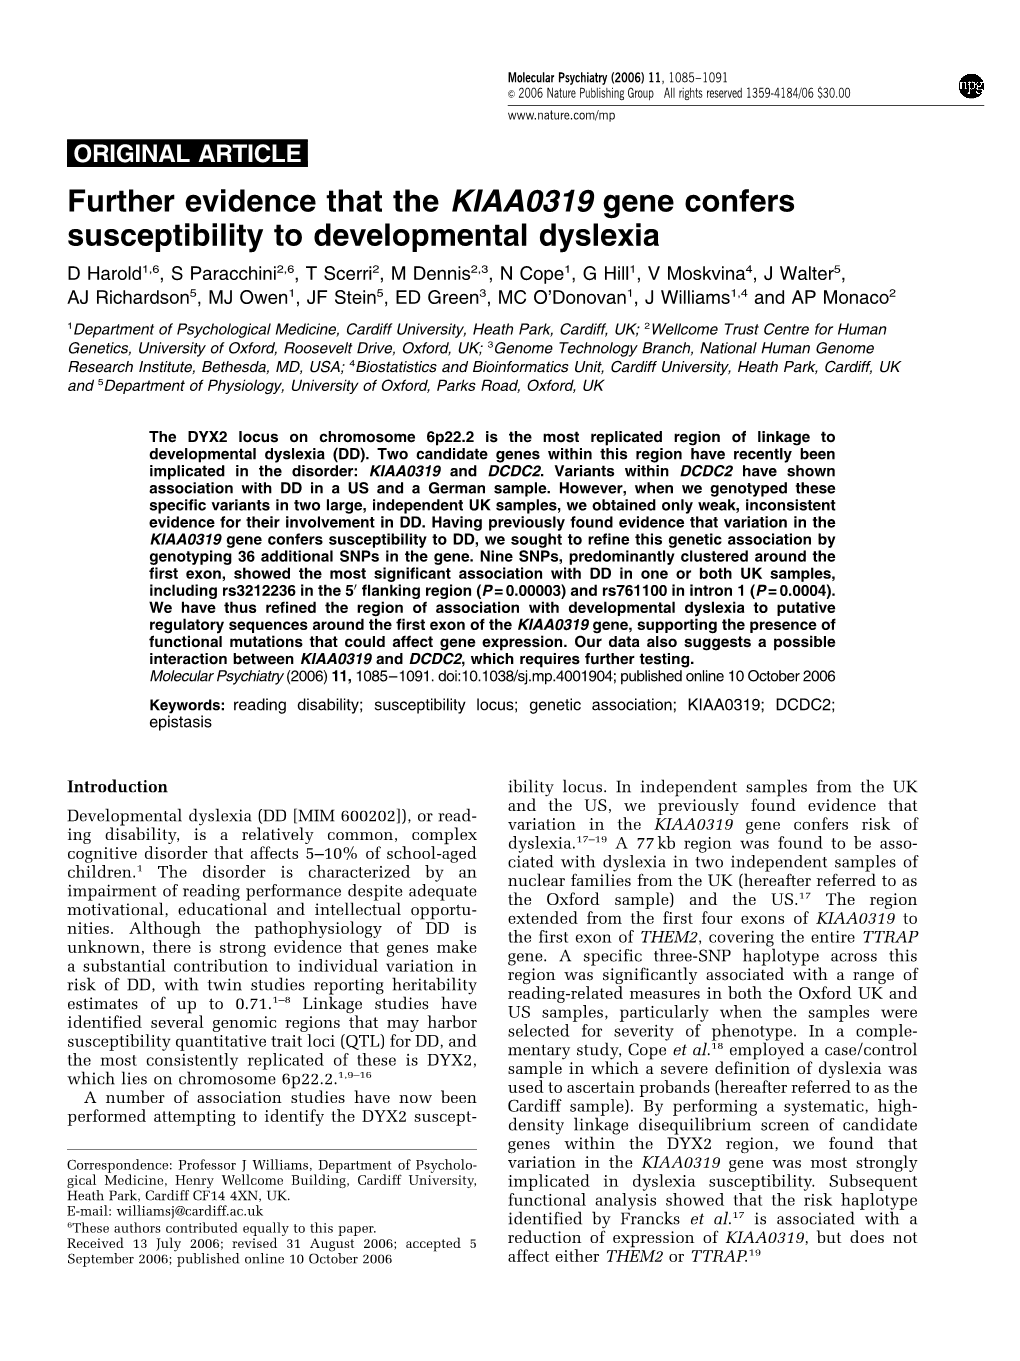 Further Evidence That the KIAA0319 Gene Confers Susceptibility To